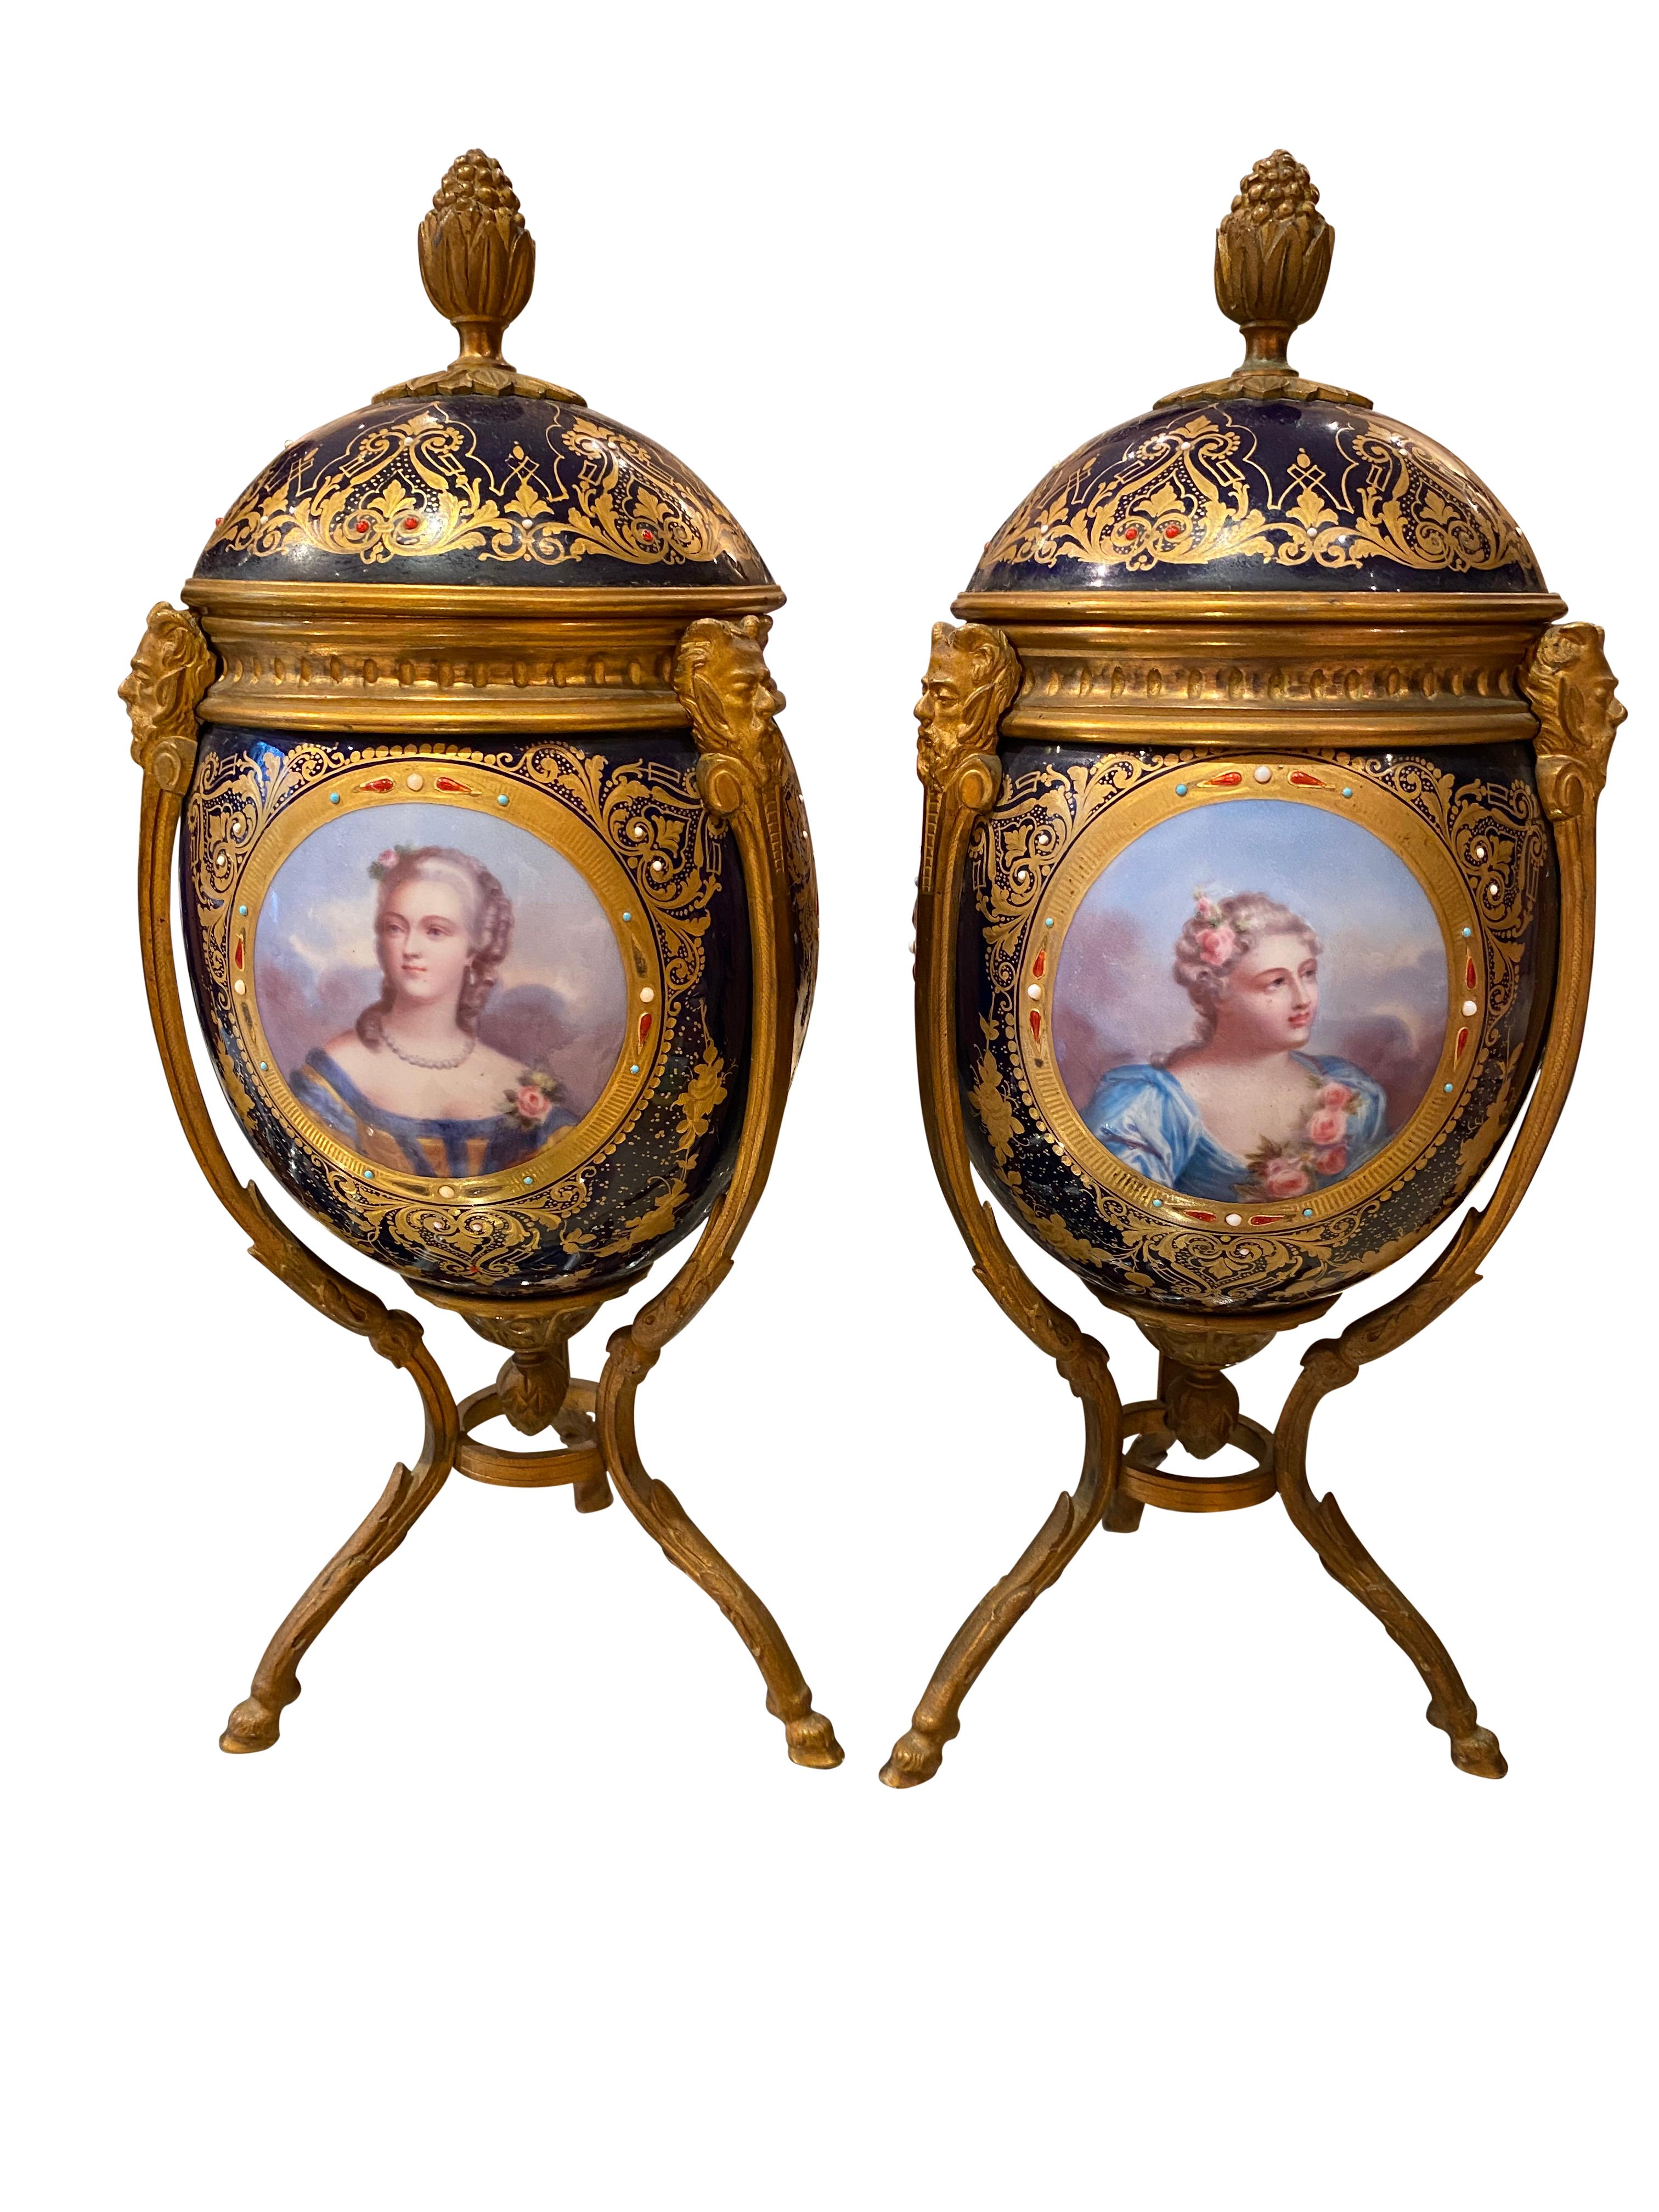 A pair of fine quality Napoleon III Sèvres style ormolu-mounted porcelain vase, 1860. The gilt pinatum finial mounted lids above bodies with jeweled panels painted with four individual portraits of Fine young ladies. A panel of flowers to the